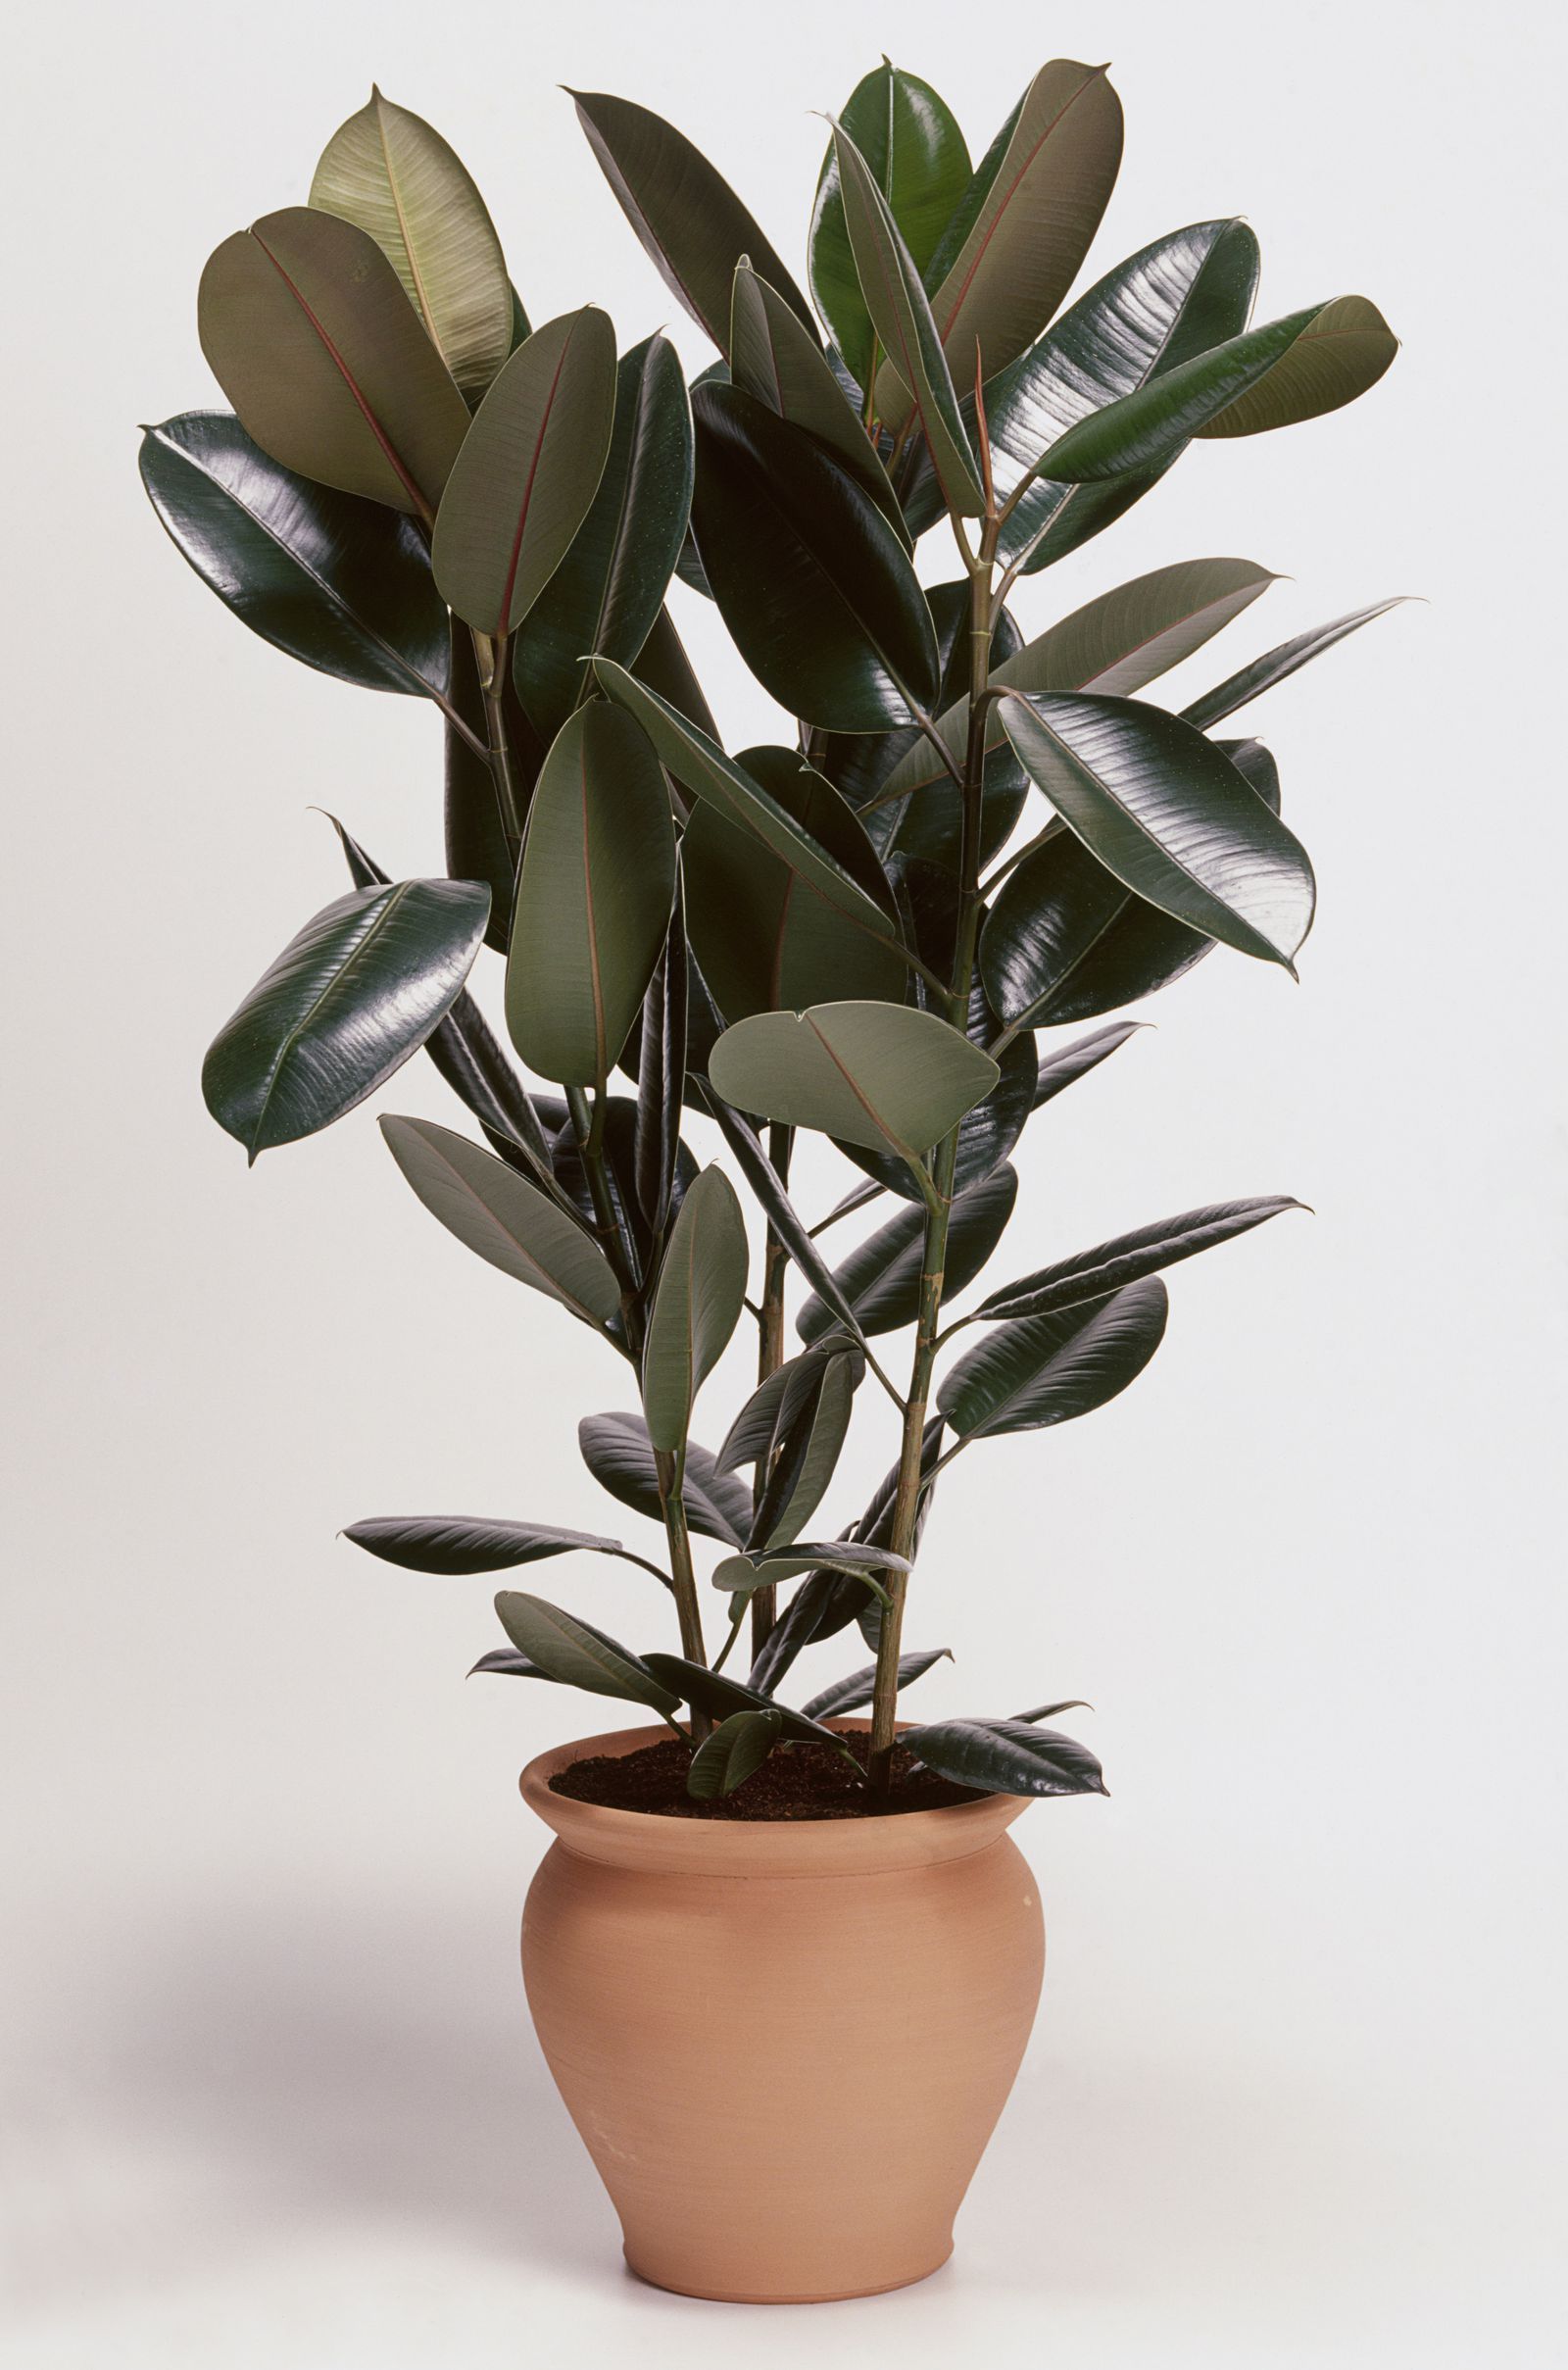 15 of the Best Bedroom Plants That Clean the Air, Too -   14 plants Interior ficus ideas